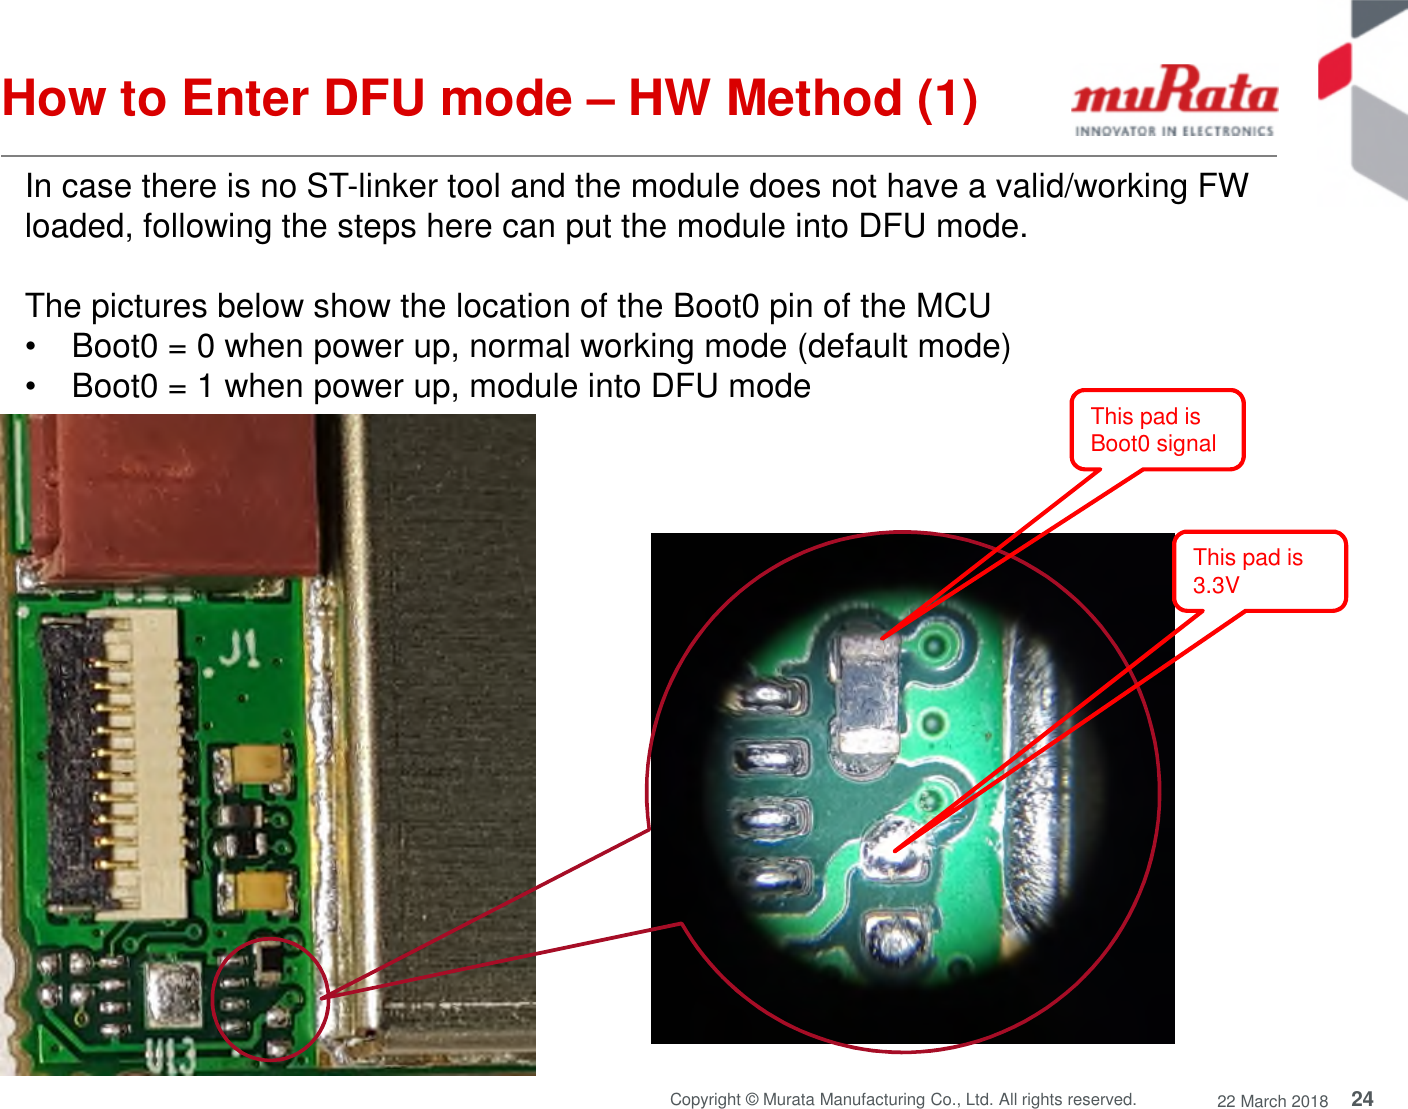 24Copyright © Murata Manufacturing Co., Ltd. All rights reserved. 22 March 2018How to Enter DFU mode – HW Method (1)In case there is no ST-linker tool and the module does not have a valid/working FWloaded, following the steps here can put the module into DFU mode.The pictures below show the location of the Boot0 pin of the MCU• Boot0 = 0 when power up, normal working mode (default mode)• Boot0 = 1 when power up, module into DFU modeThis pad is3.3VThis pad isBoot0 signal